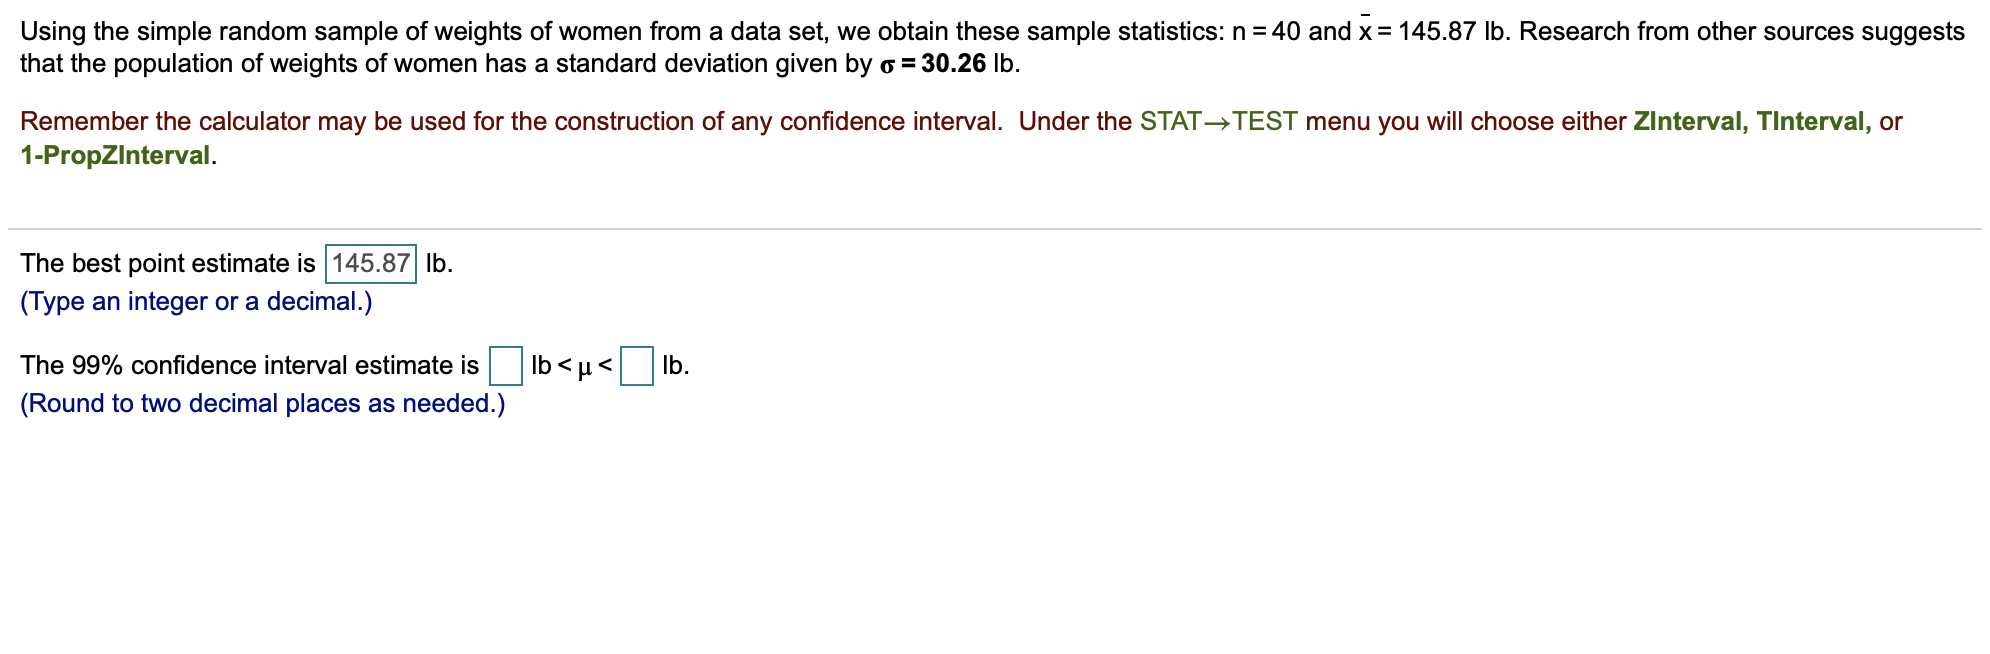 Using the simple random sample of weights of women from a data set, we obtain these sample statistics: n 40 and x
that the population of weights of women has a standard deviation given by o = 30.26 lb.
145.87 lb. Research from other sources suggests
Remember the calculator may be used for the construction of any confidence interval. Under the STAT- TEST menu you will choose either ZInterval, TInterval, or
1-PropZlnterval
The best point estimate is 145.87 lb
(Type an integer or a decimal.)
lb u
The 99% confidence interval estimate is
lb
(Round to two decimal places as needed.)
